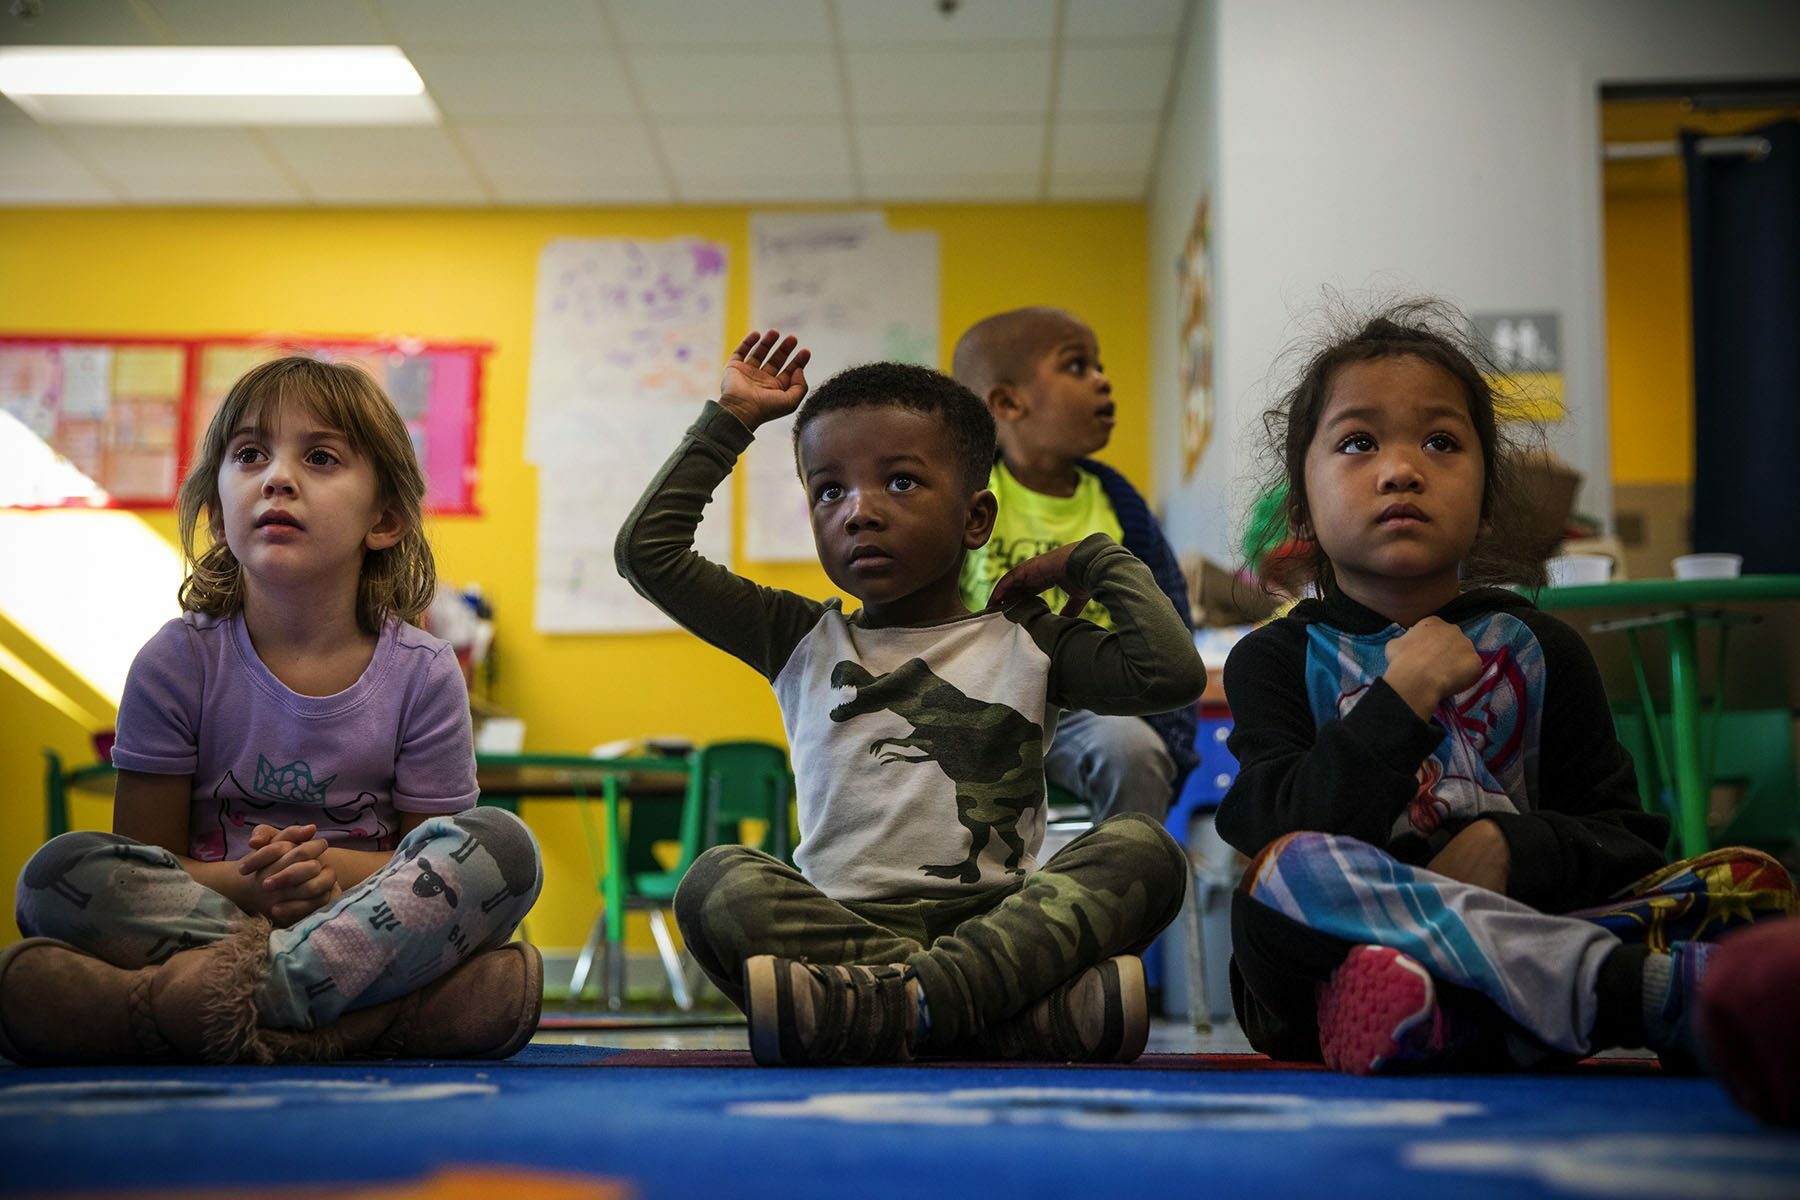 Three small children are seen in a colorful classroom. The child in the middle raises his hand while the other two appear to be listening..